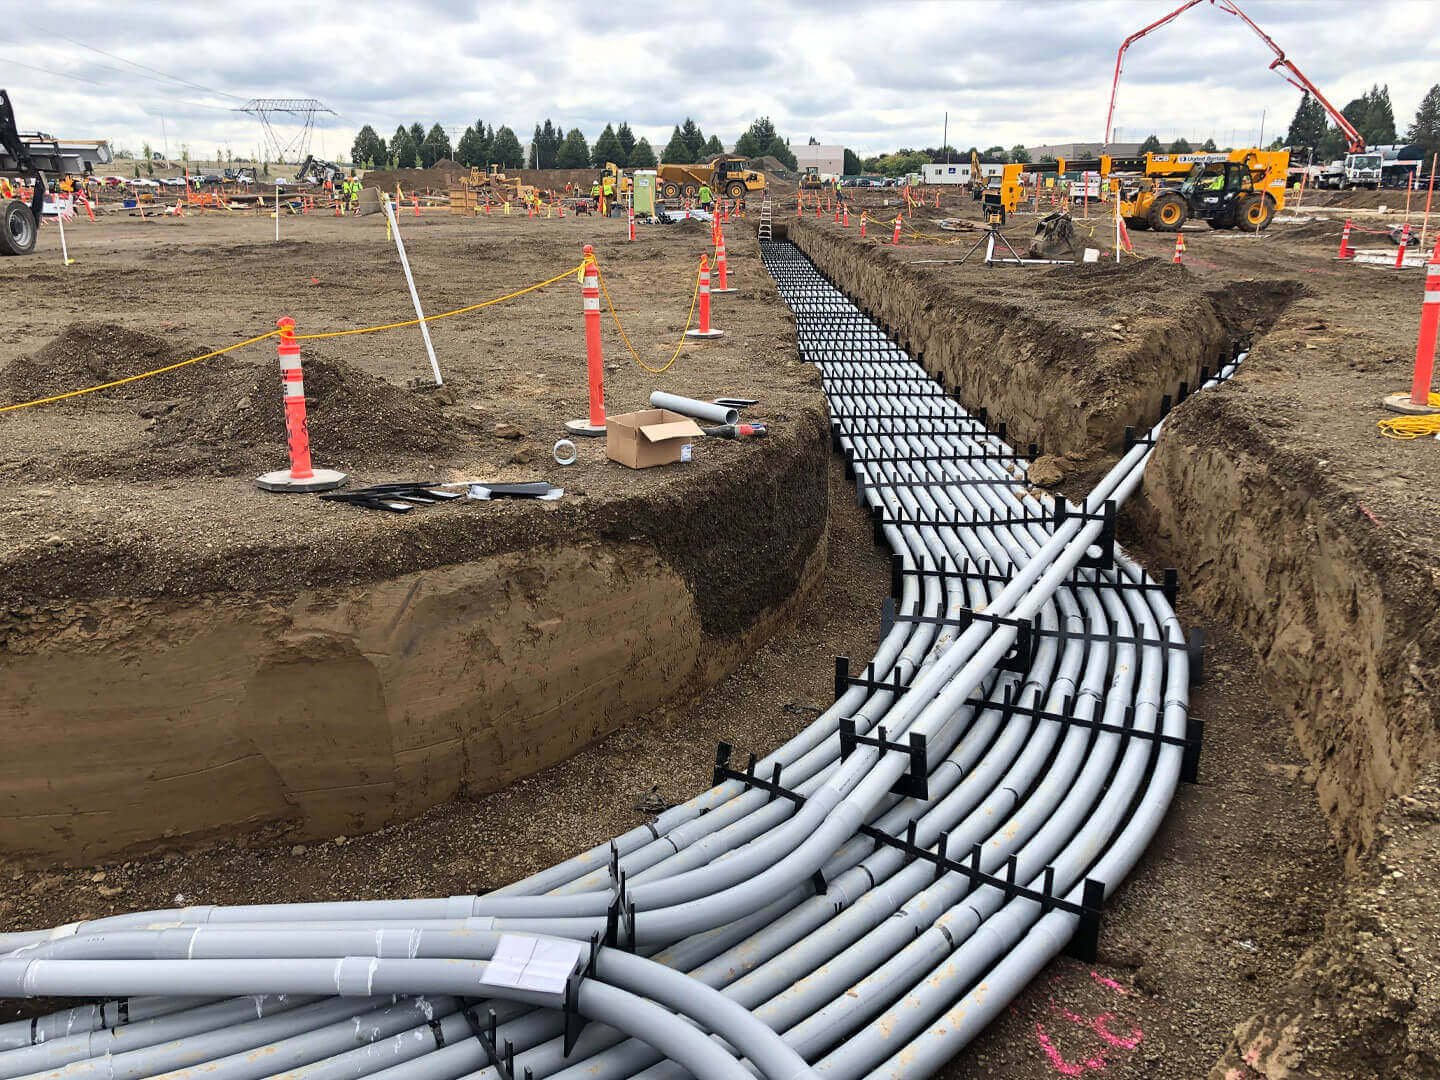 What’s the Difference Between HDPE Conduit and PVC Conduit